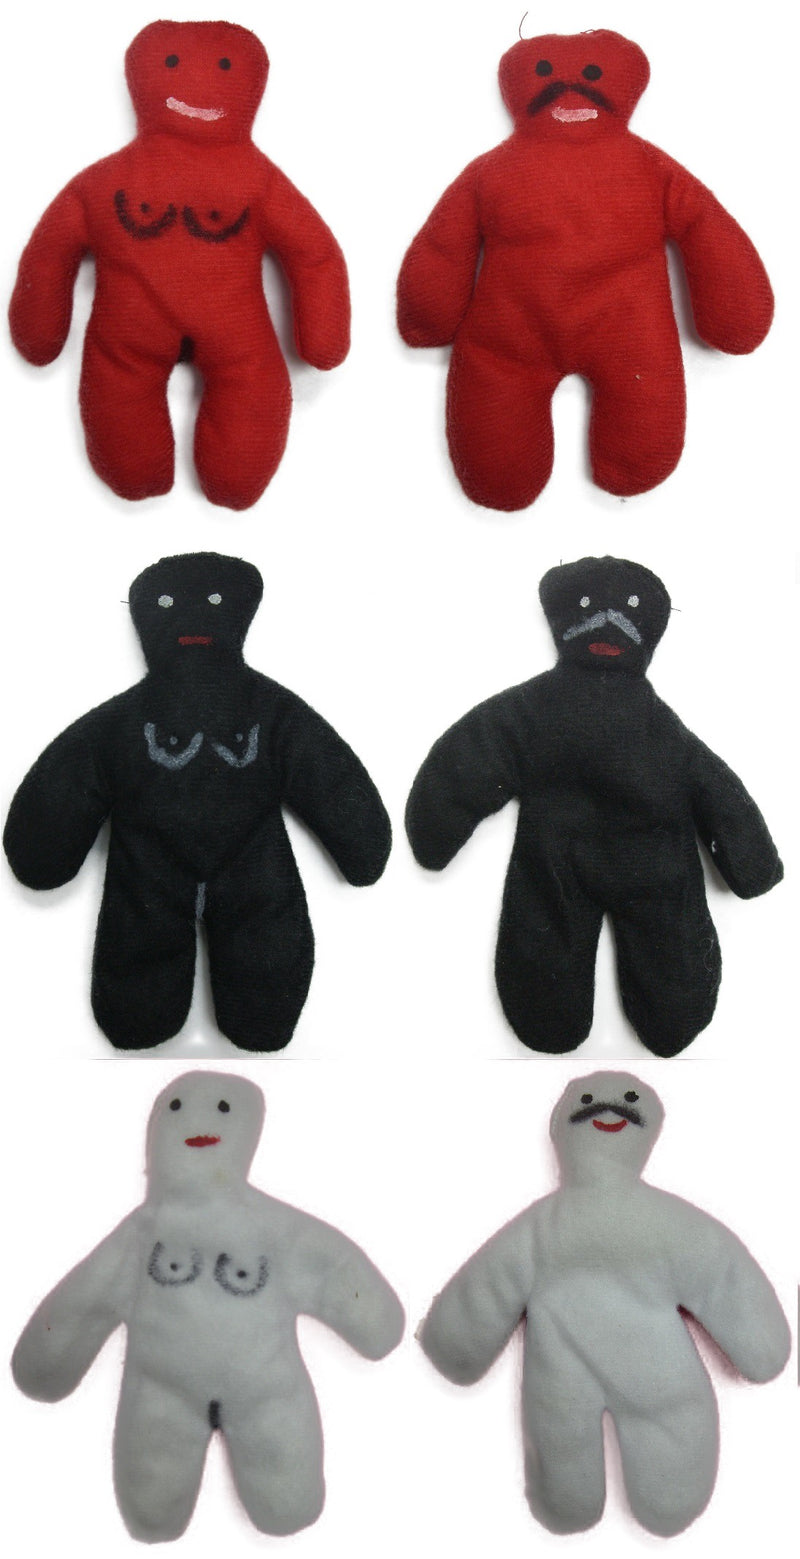 Red Voodoo Doll 6"X2"